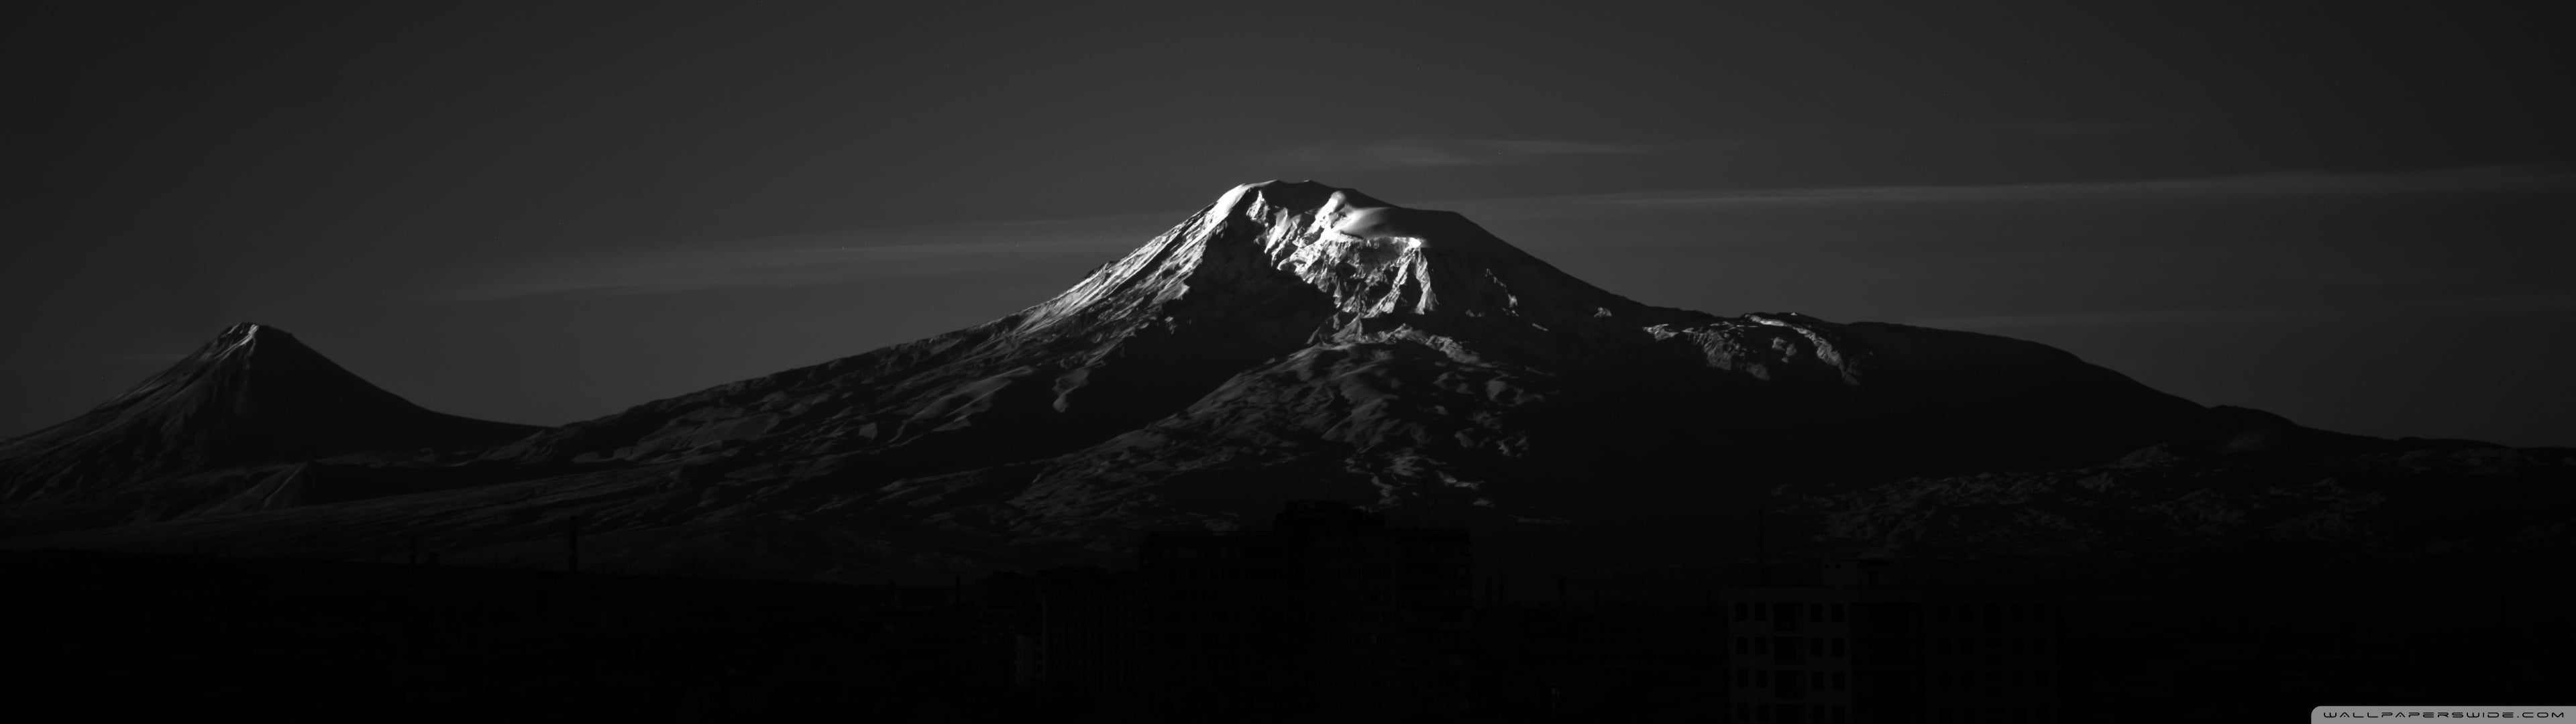 500 Dark Mountain Pictures  Download Free Images on Unsplash